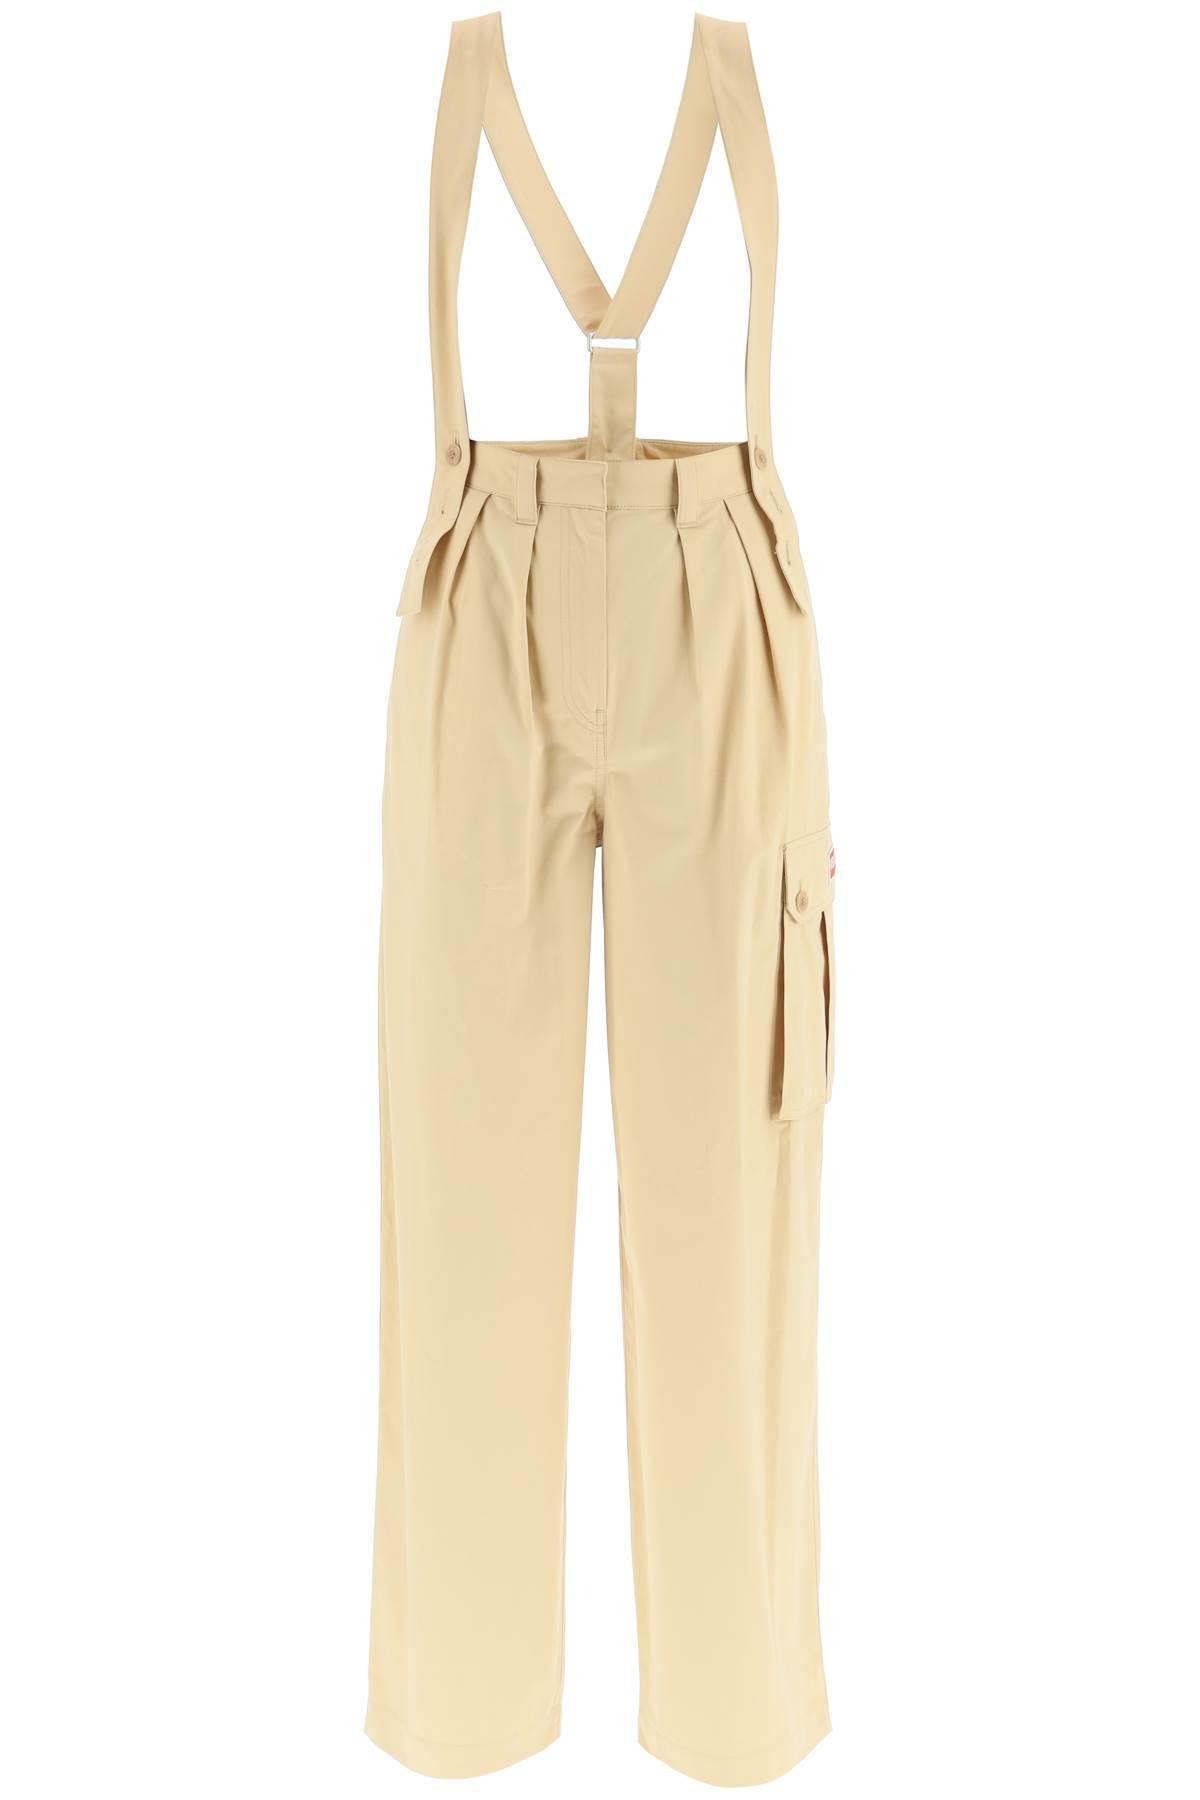 KENZO Cotton Cargo Pants With Suspenders in Natural | Lyst